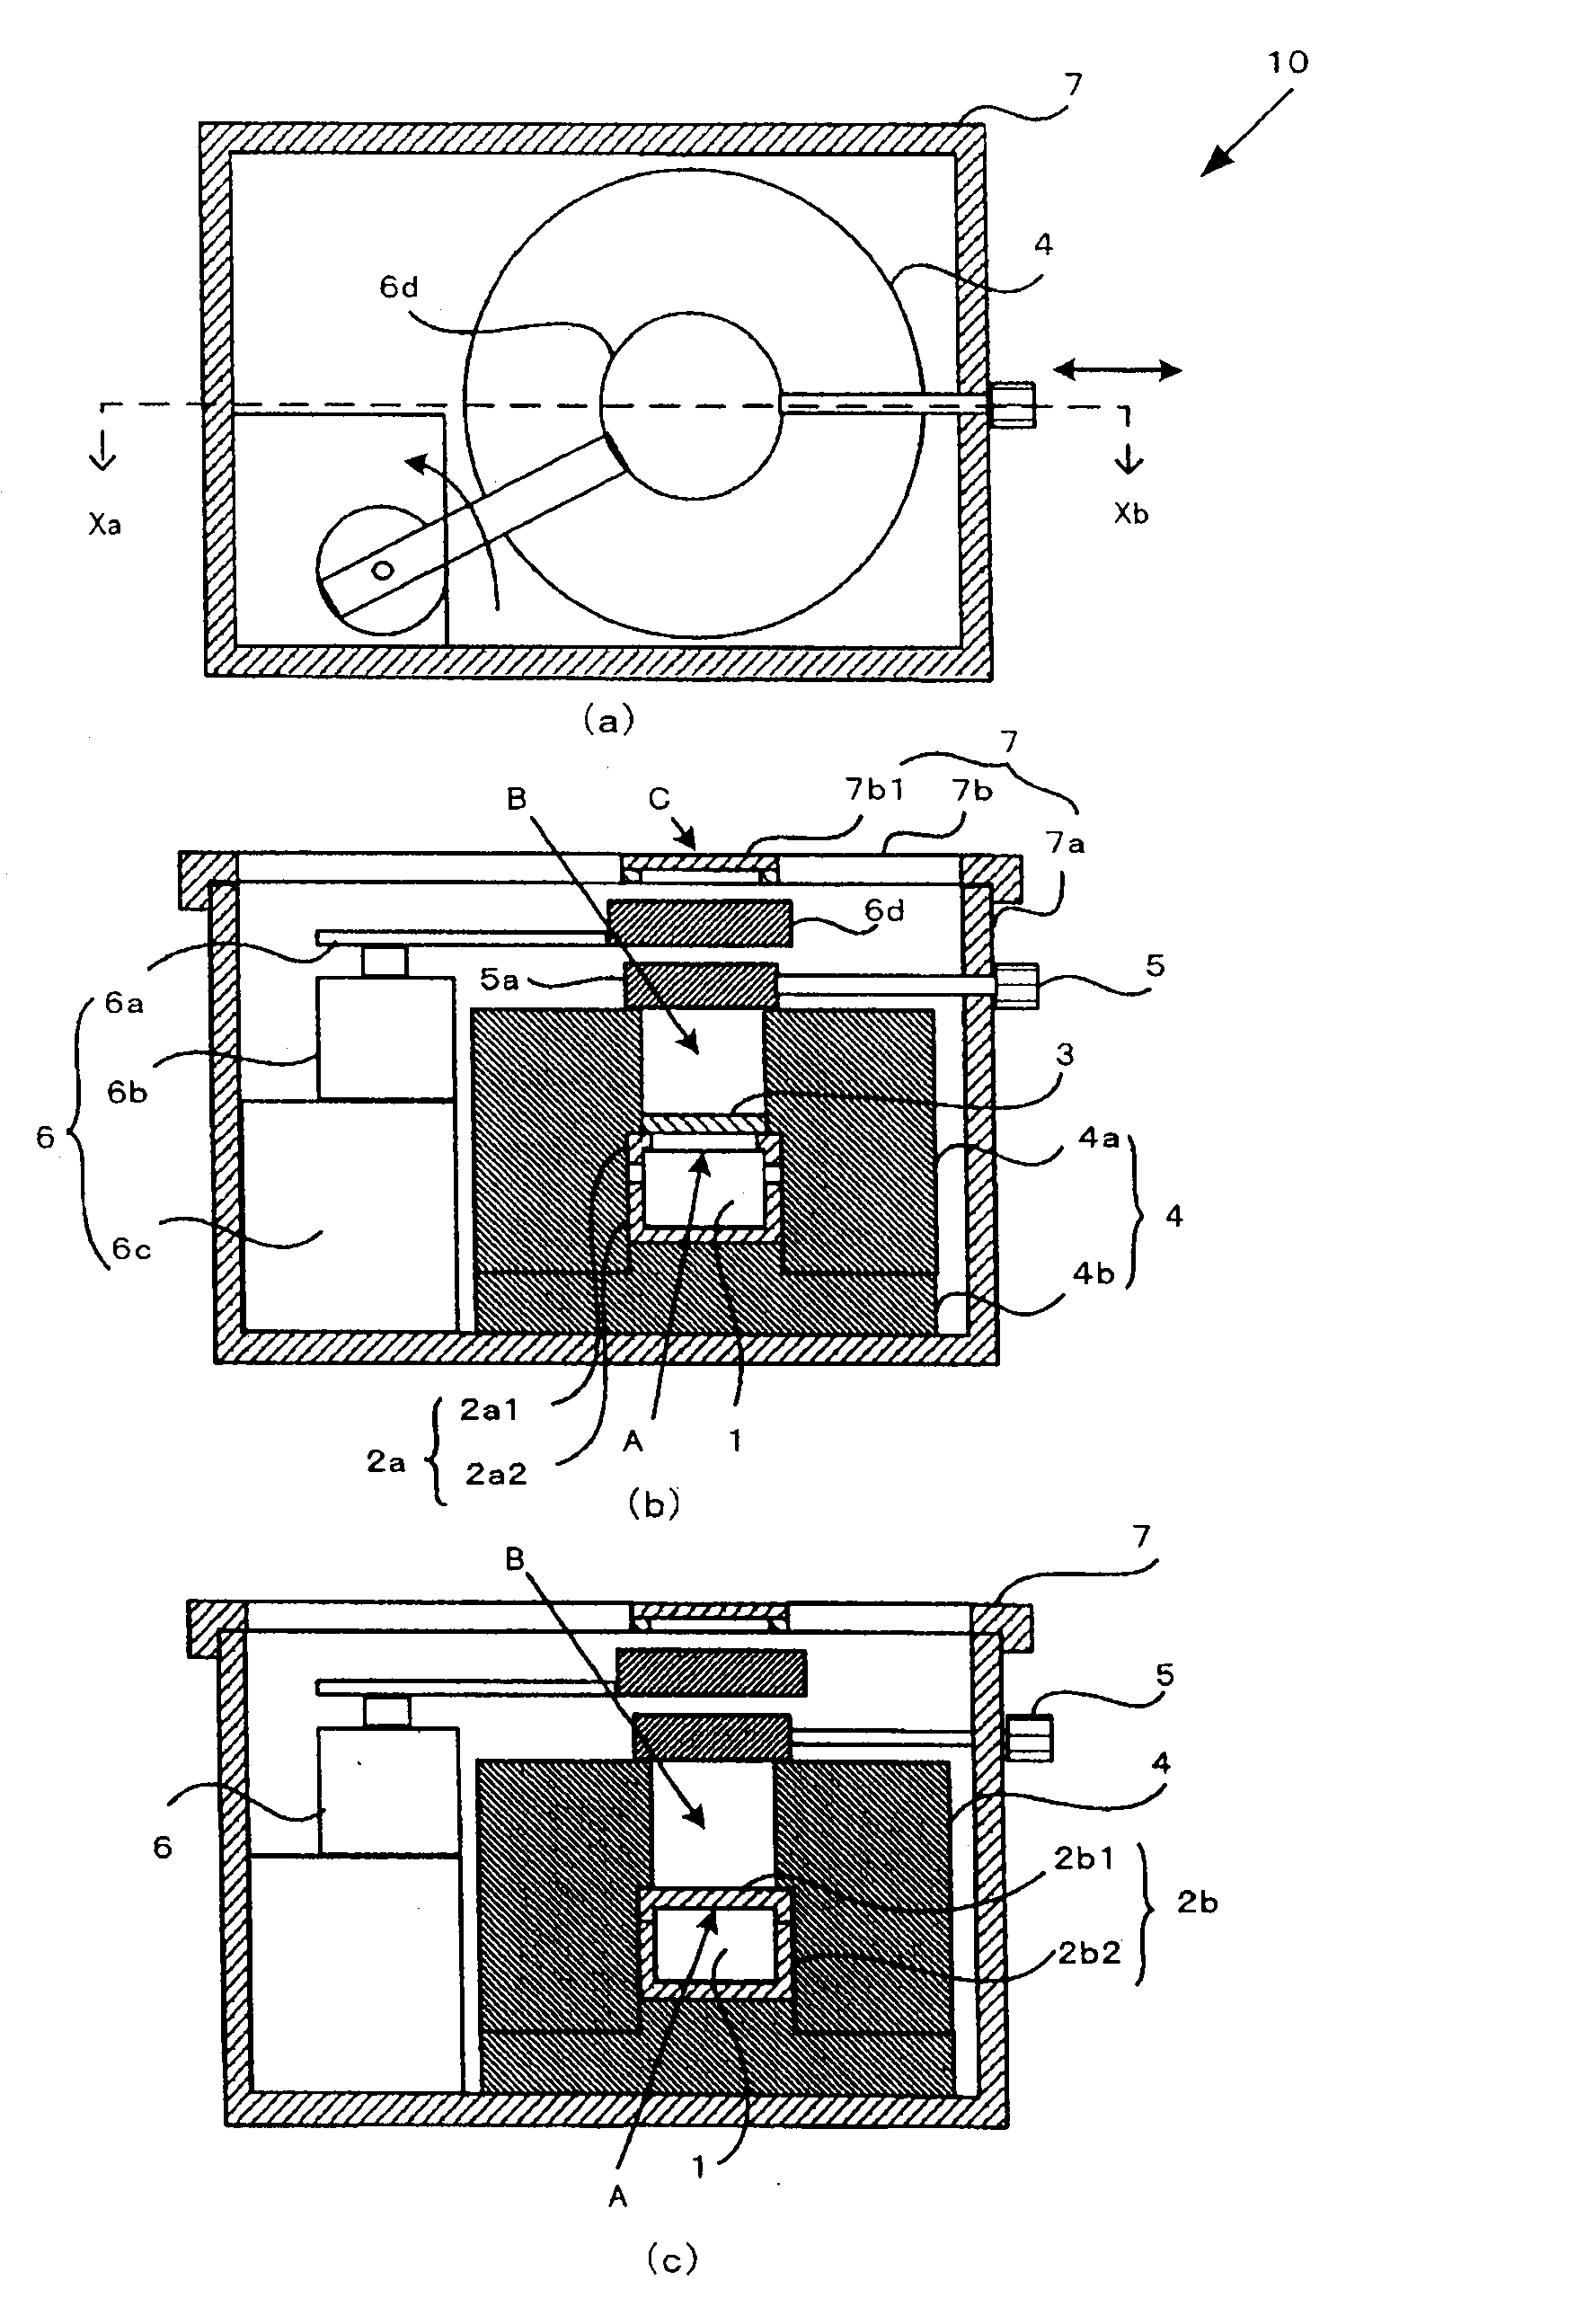 Radiation source container and method of extending the sealing life of a radiation source capsule accommodated in the radiation source container thereof